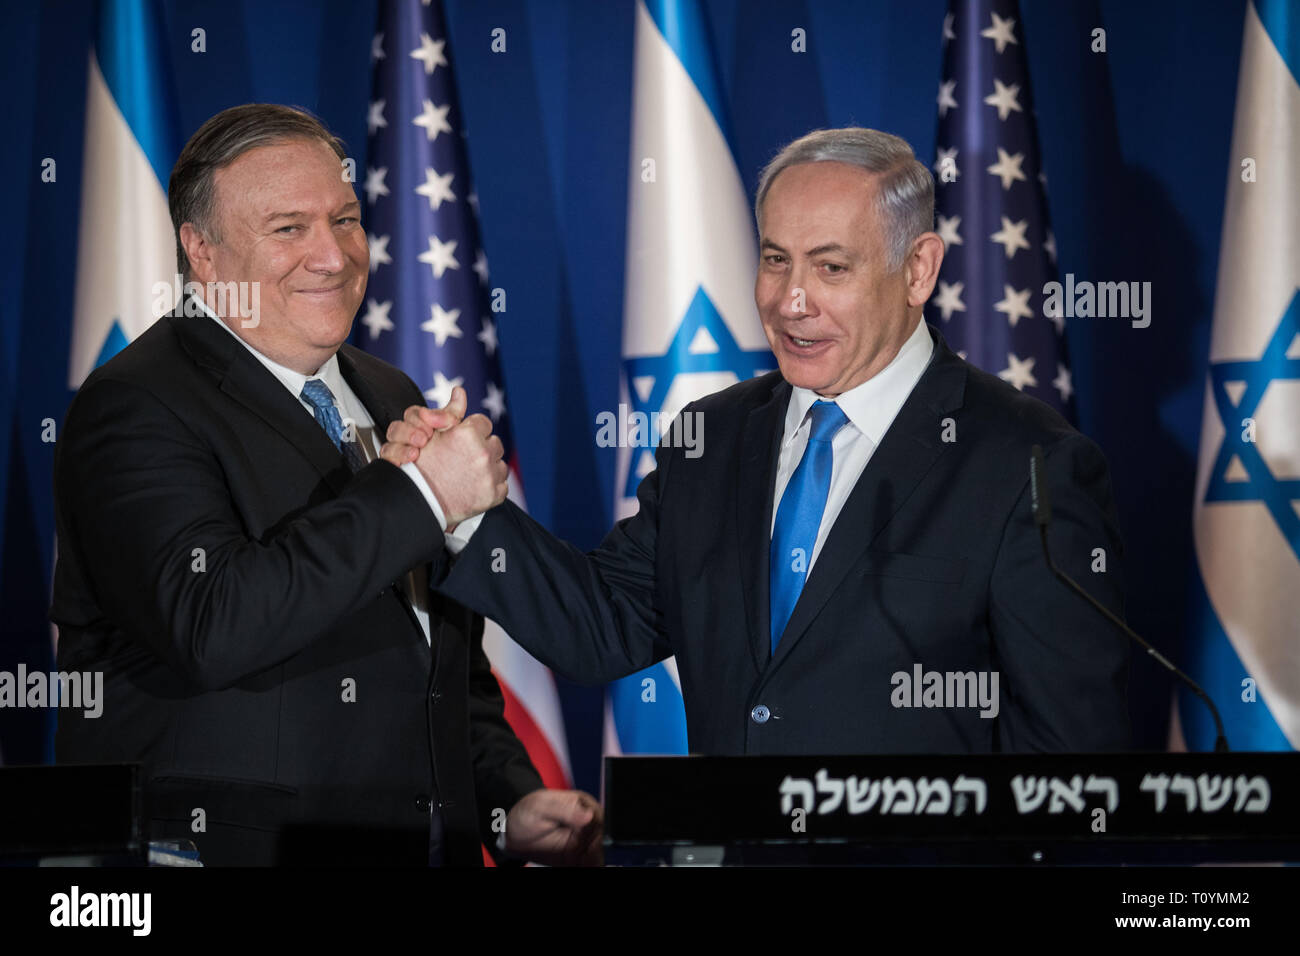 Beijing, China. 21st Mar, 2019. Israeli Prime Minister Benjamin Netanyahu (R) and U.S. Secretary of State Mike Pompeo attend a press conference in Jerusalem, on March 21, 2019. Credit: JINI/Hadas Parush/Xinhua/Alamy Live News Stock Photo